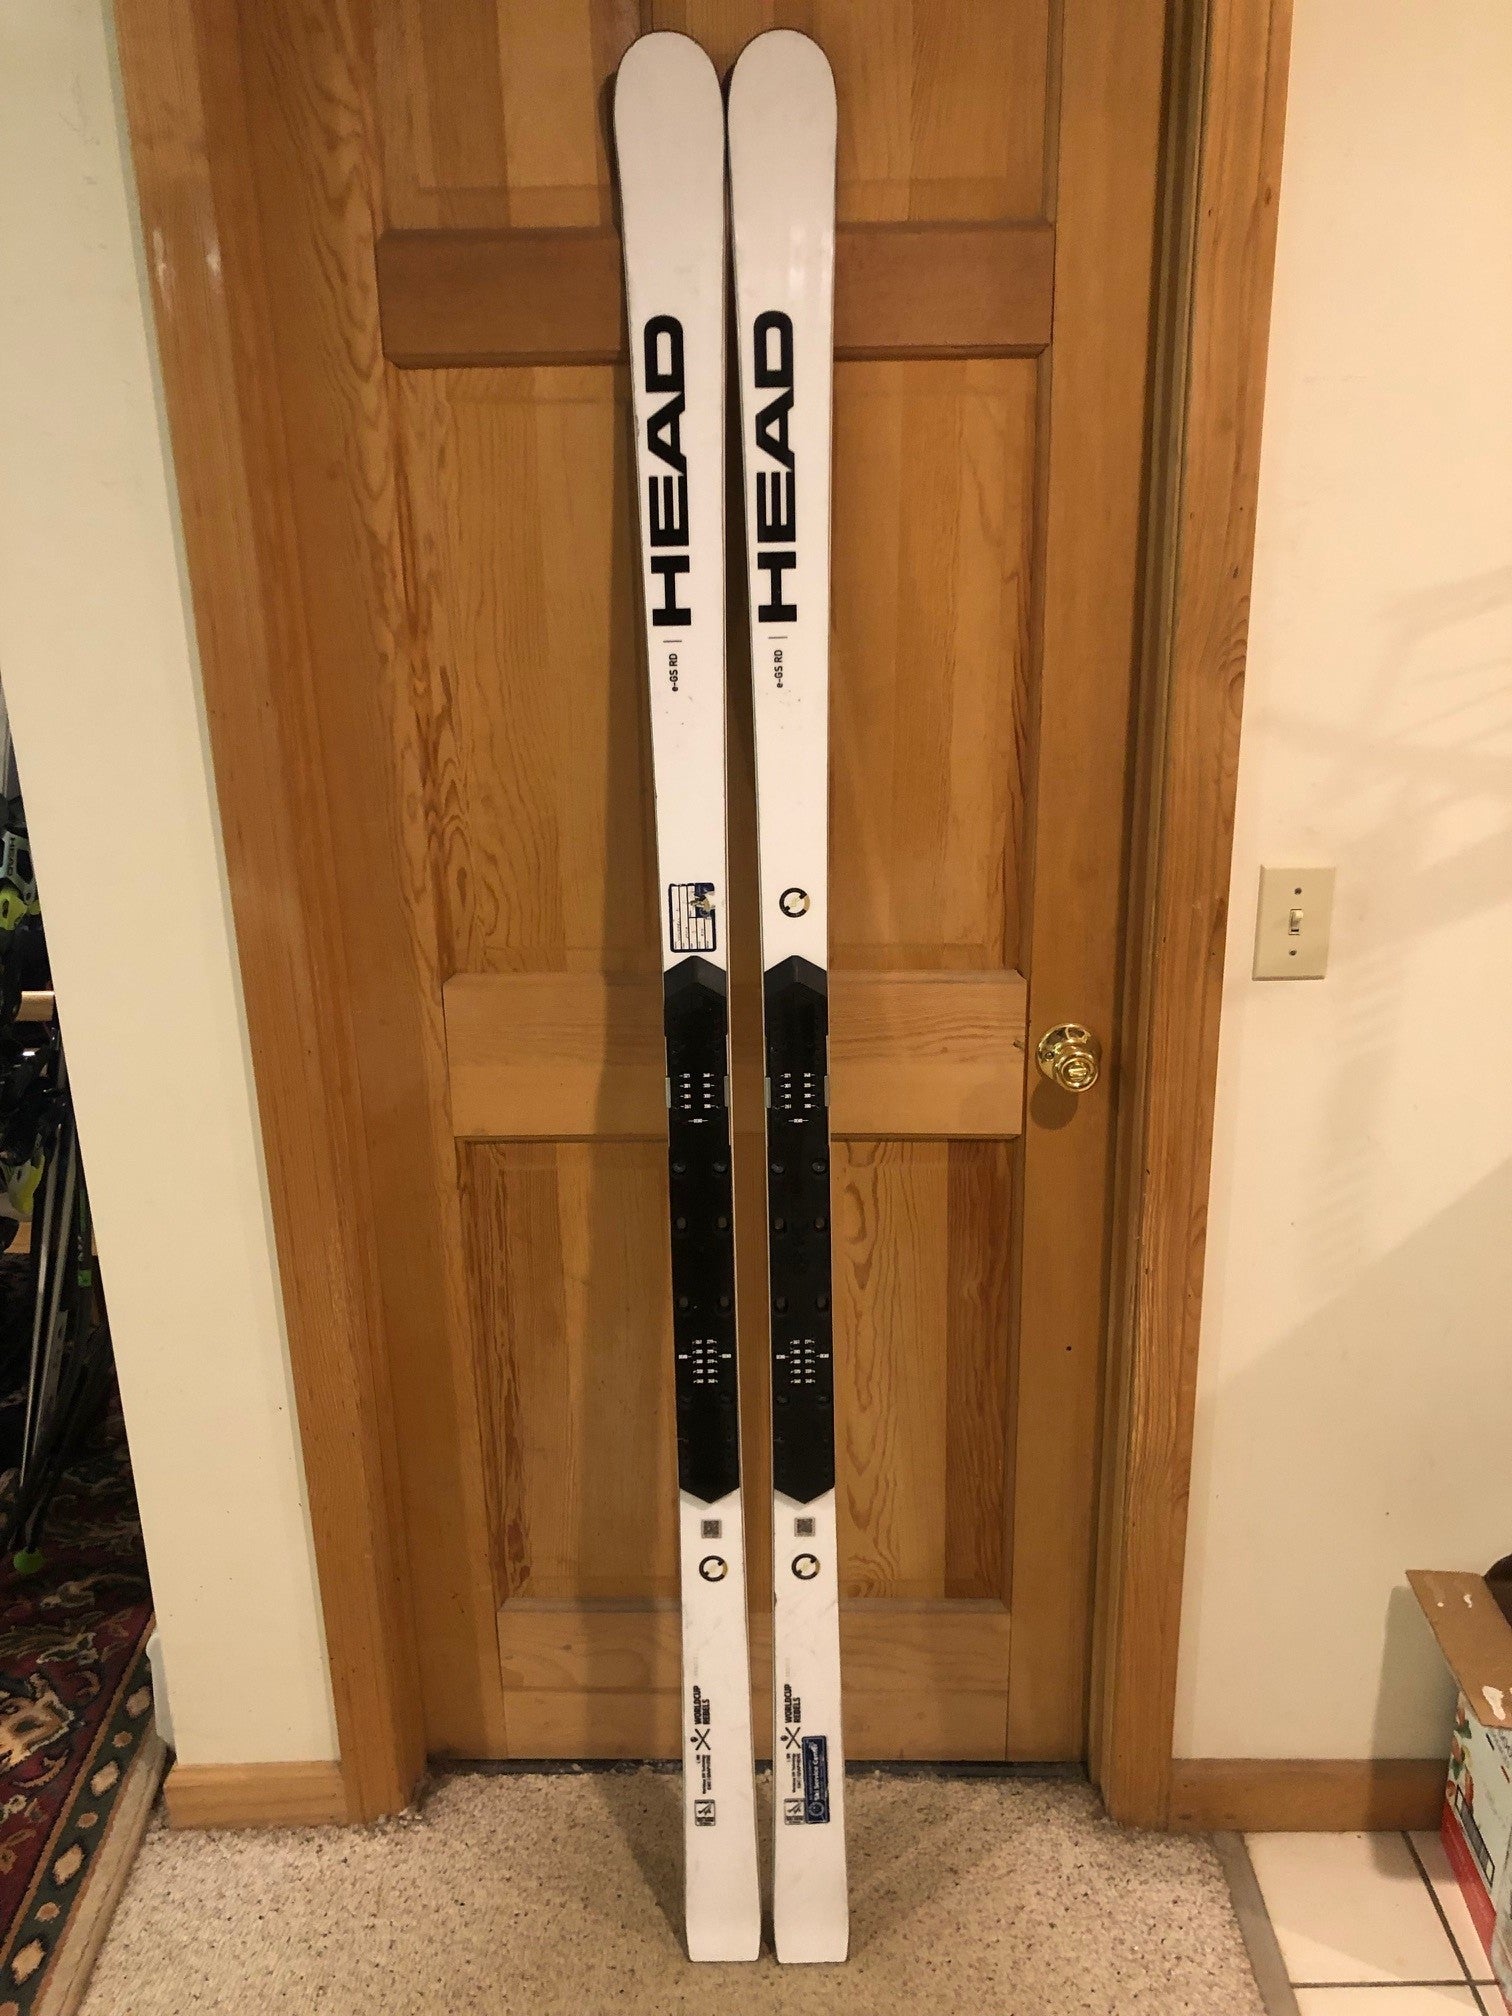 HEAD World Cup Rebels i.GS RD FIS Skis, 188 cm, Used